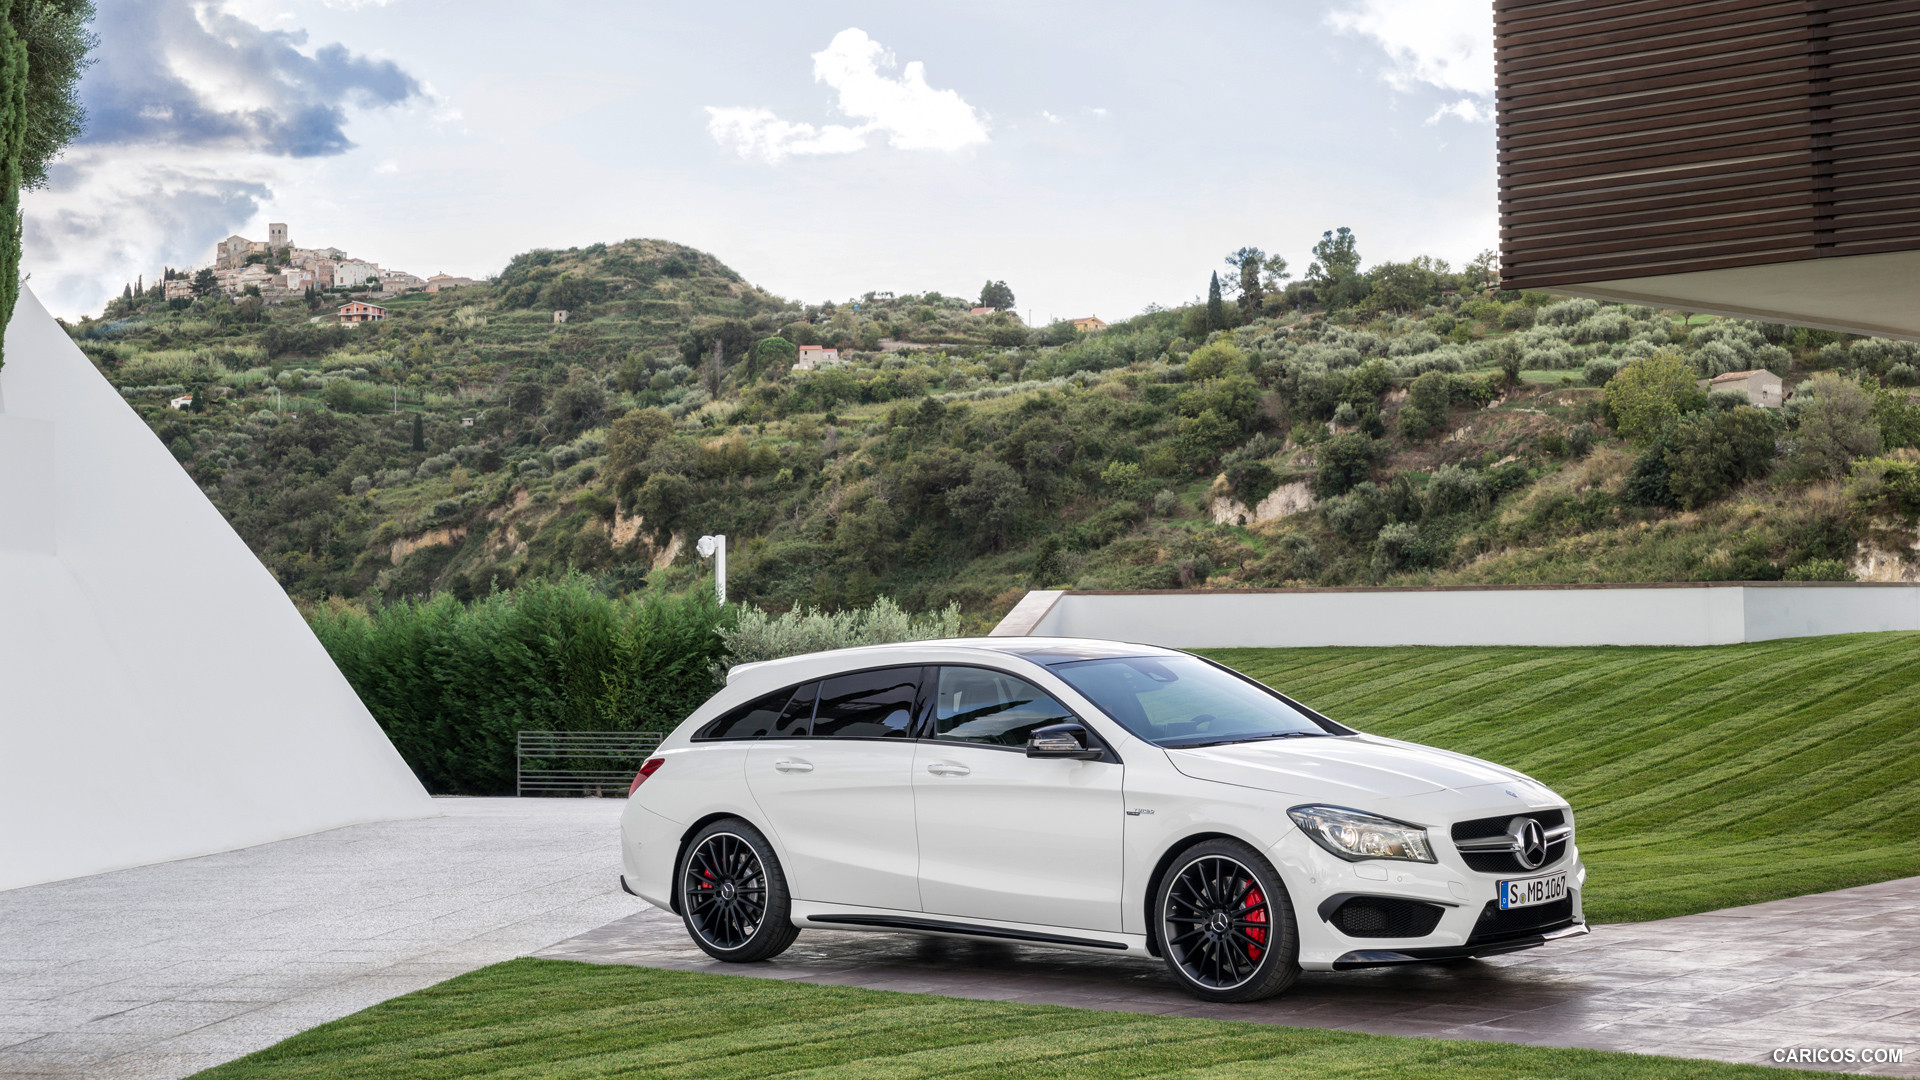 2015 Mercedes-Benz CLA 45 AMG Shooting Brake (Calcite White) - Side, #36 of 70